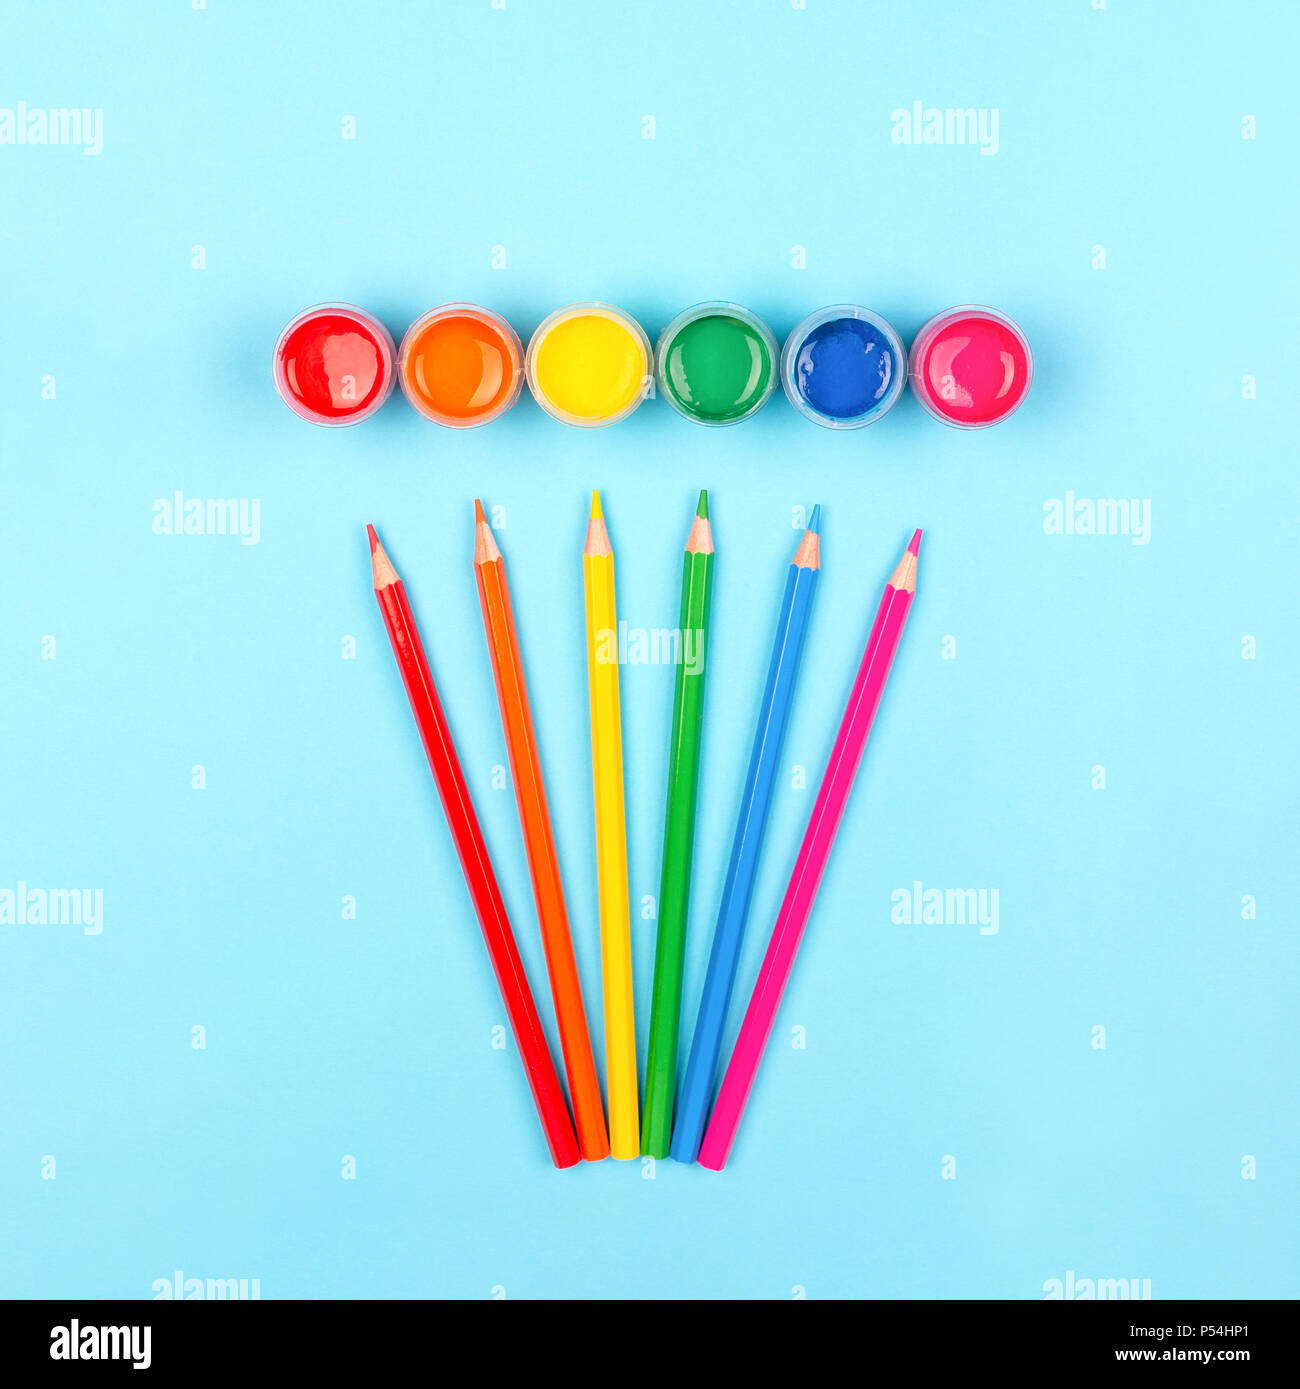 Colorful paints and pencils on wooden background. Stock Photo